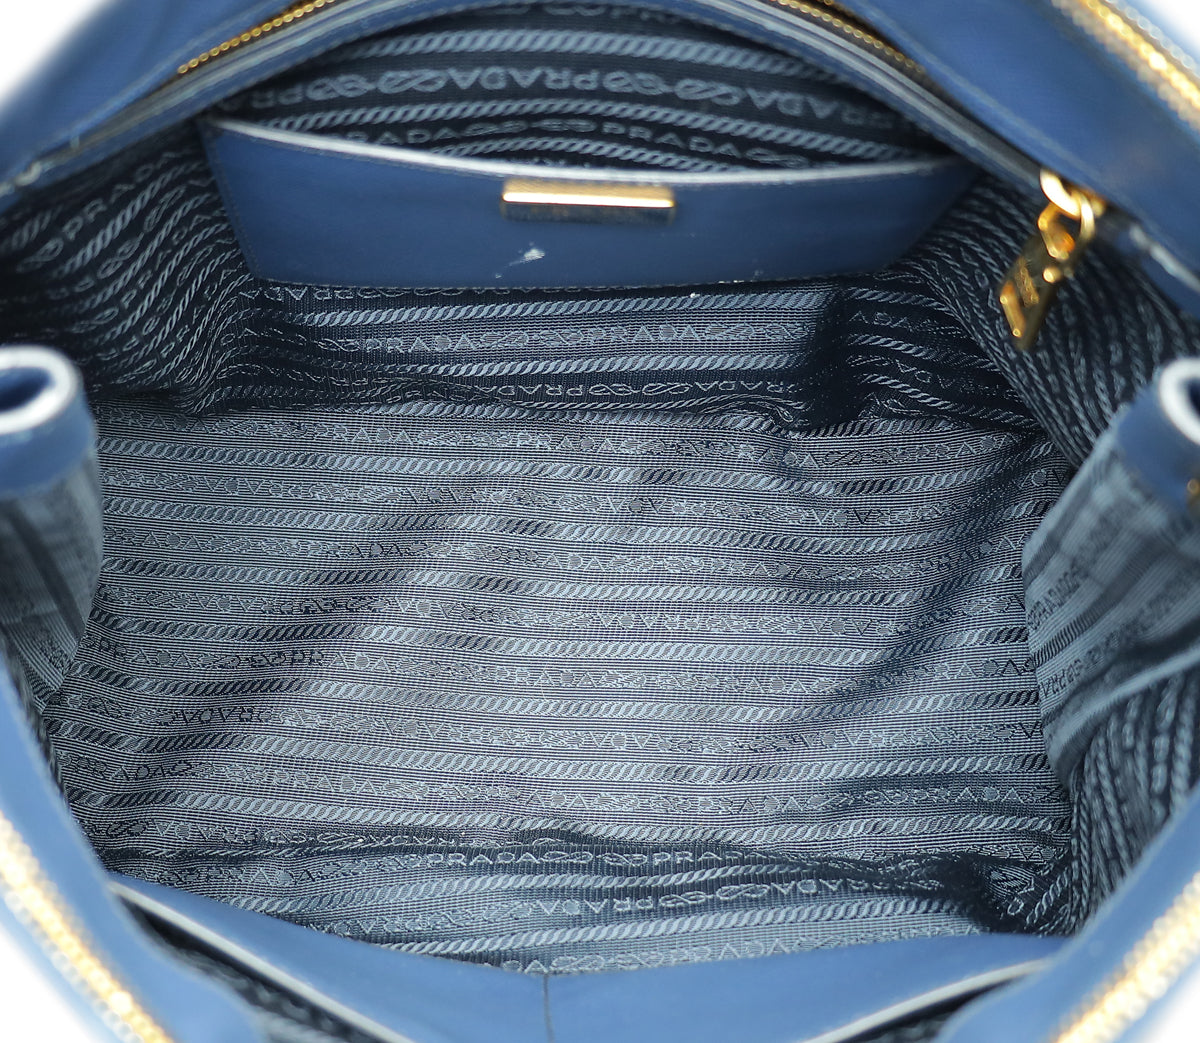 Load image into Gallery viewer, Prada Blue Lux Galleria Large Bag
